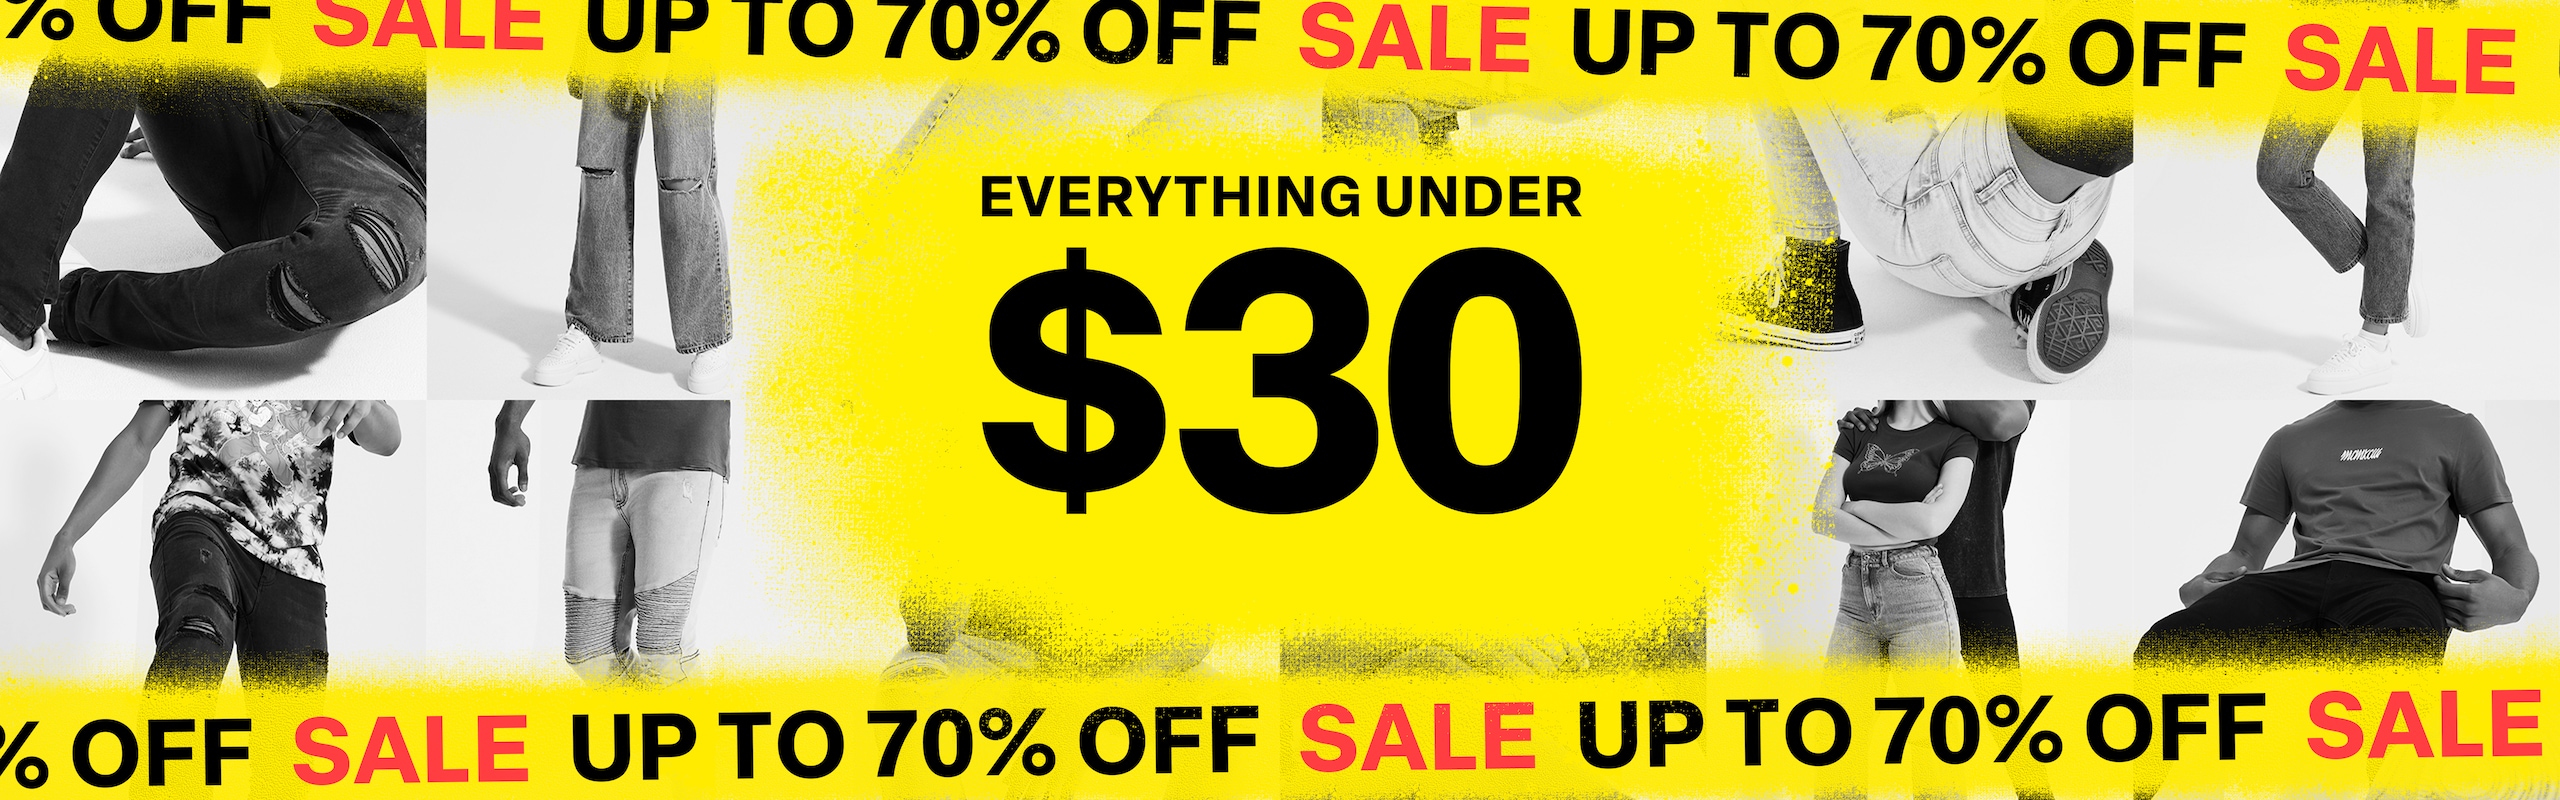 Sale. Everything Under $30. Up To 70% Off